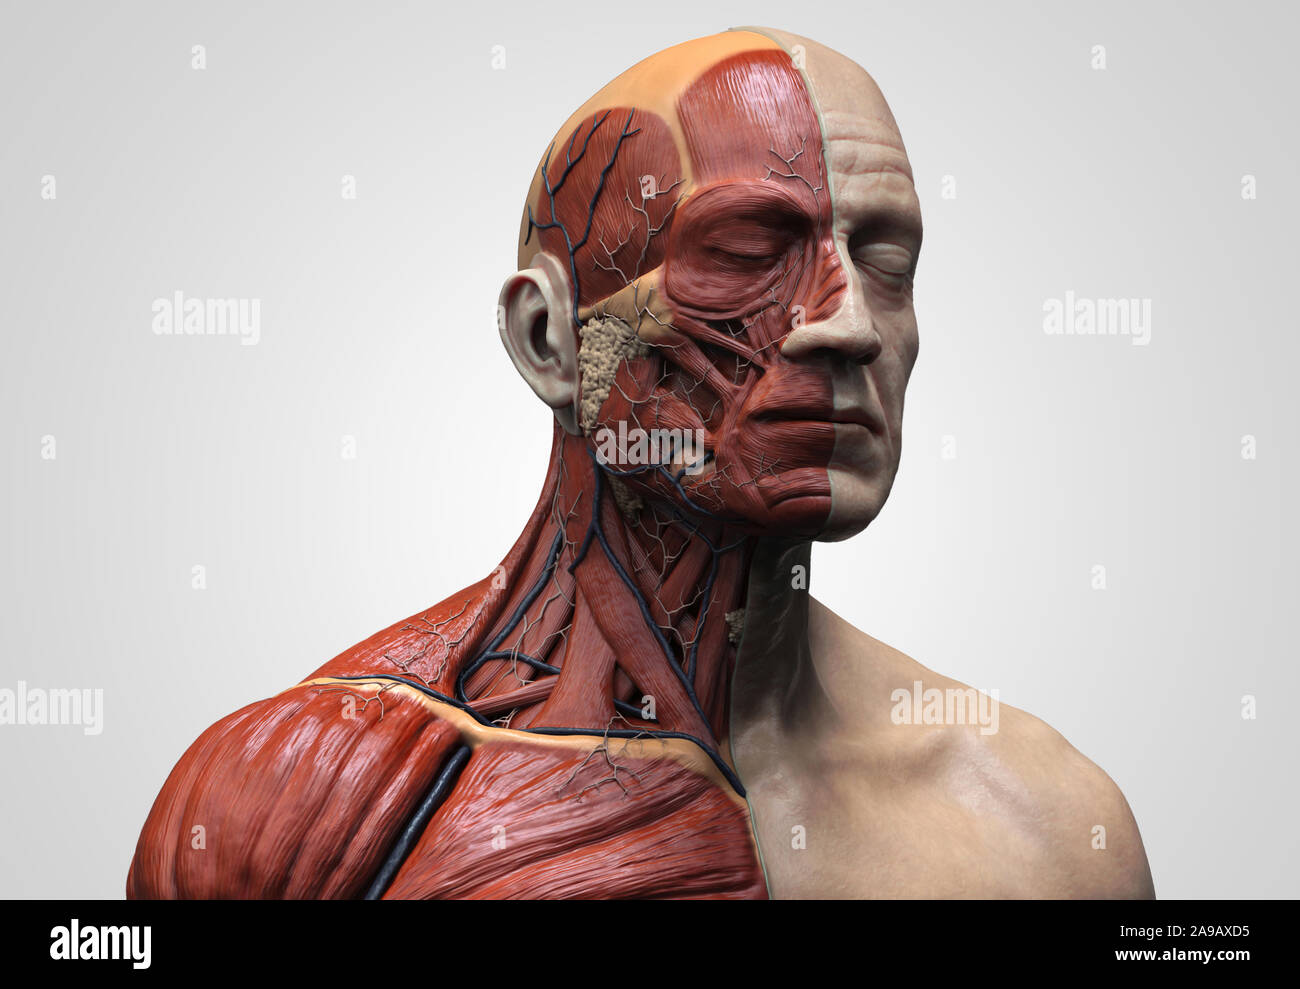 Human Body Anatomy Muscles Structure Of A Male Front View Side View And Perspective 3d Render Background Stock Photo Alamy